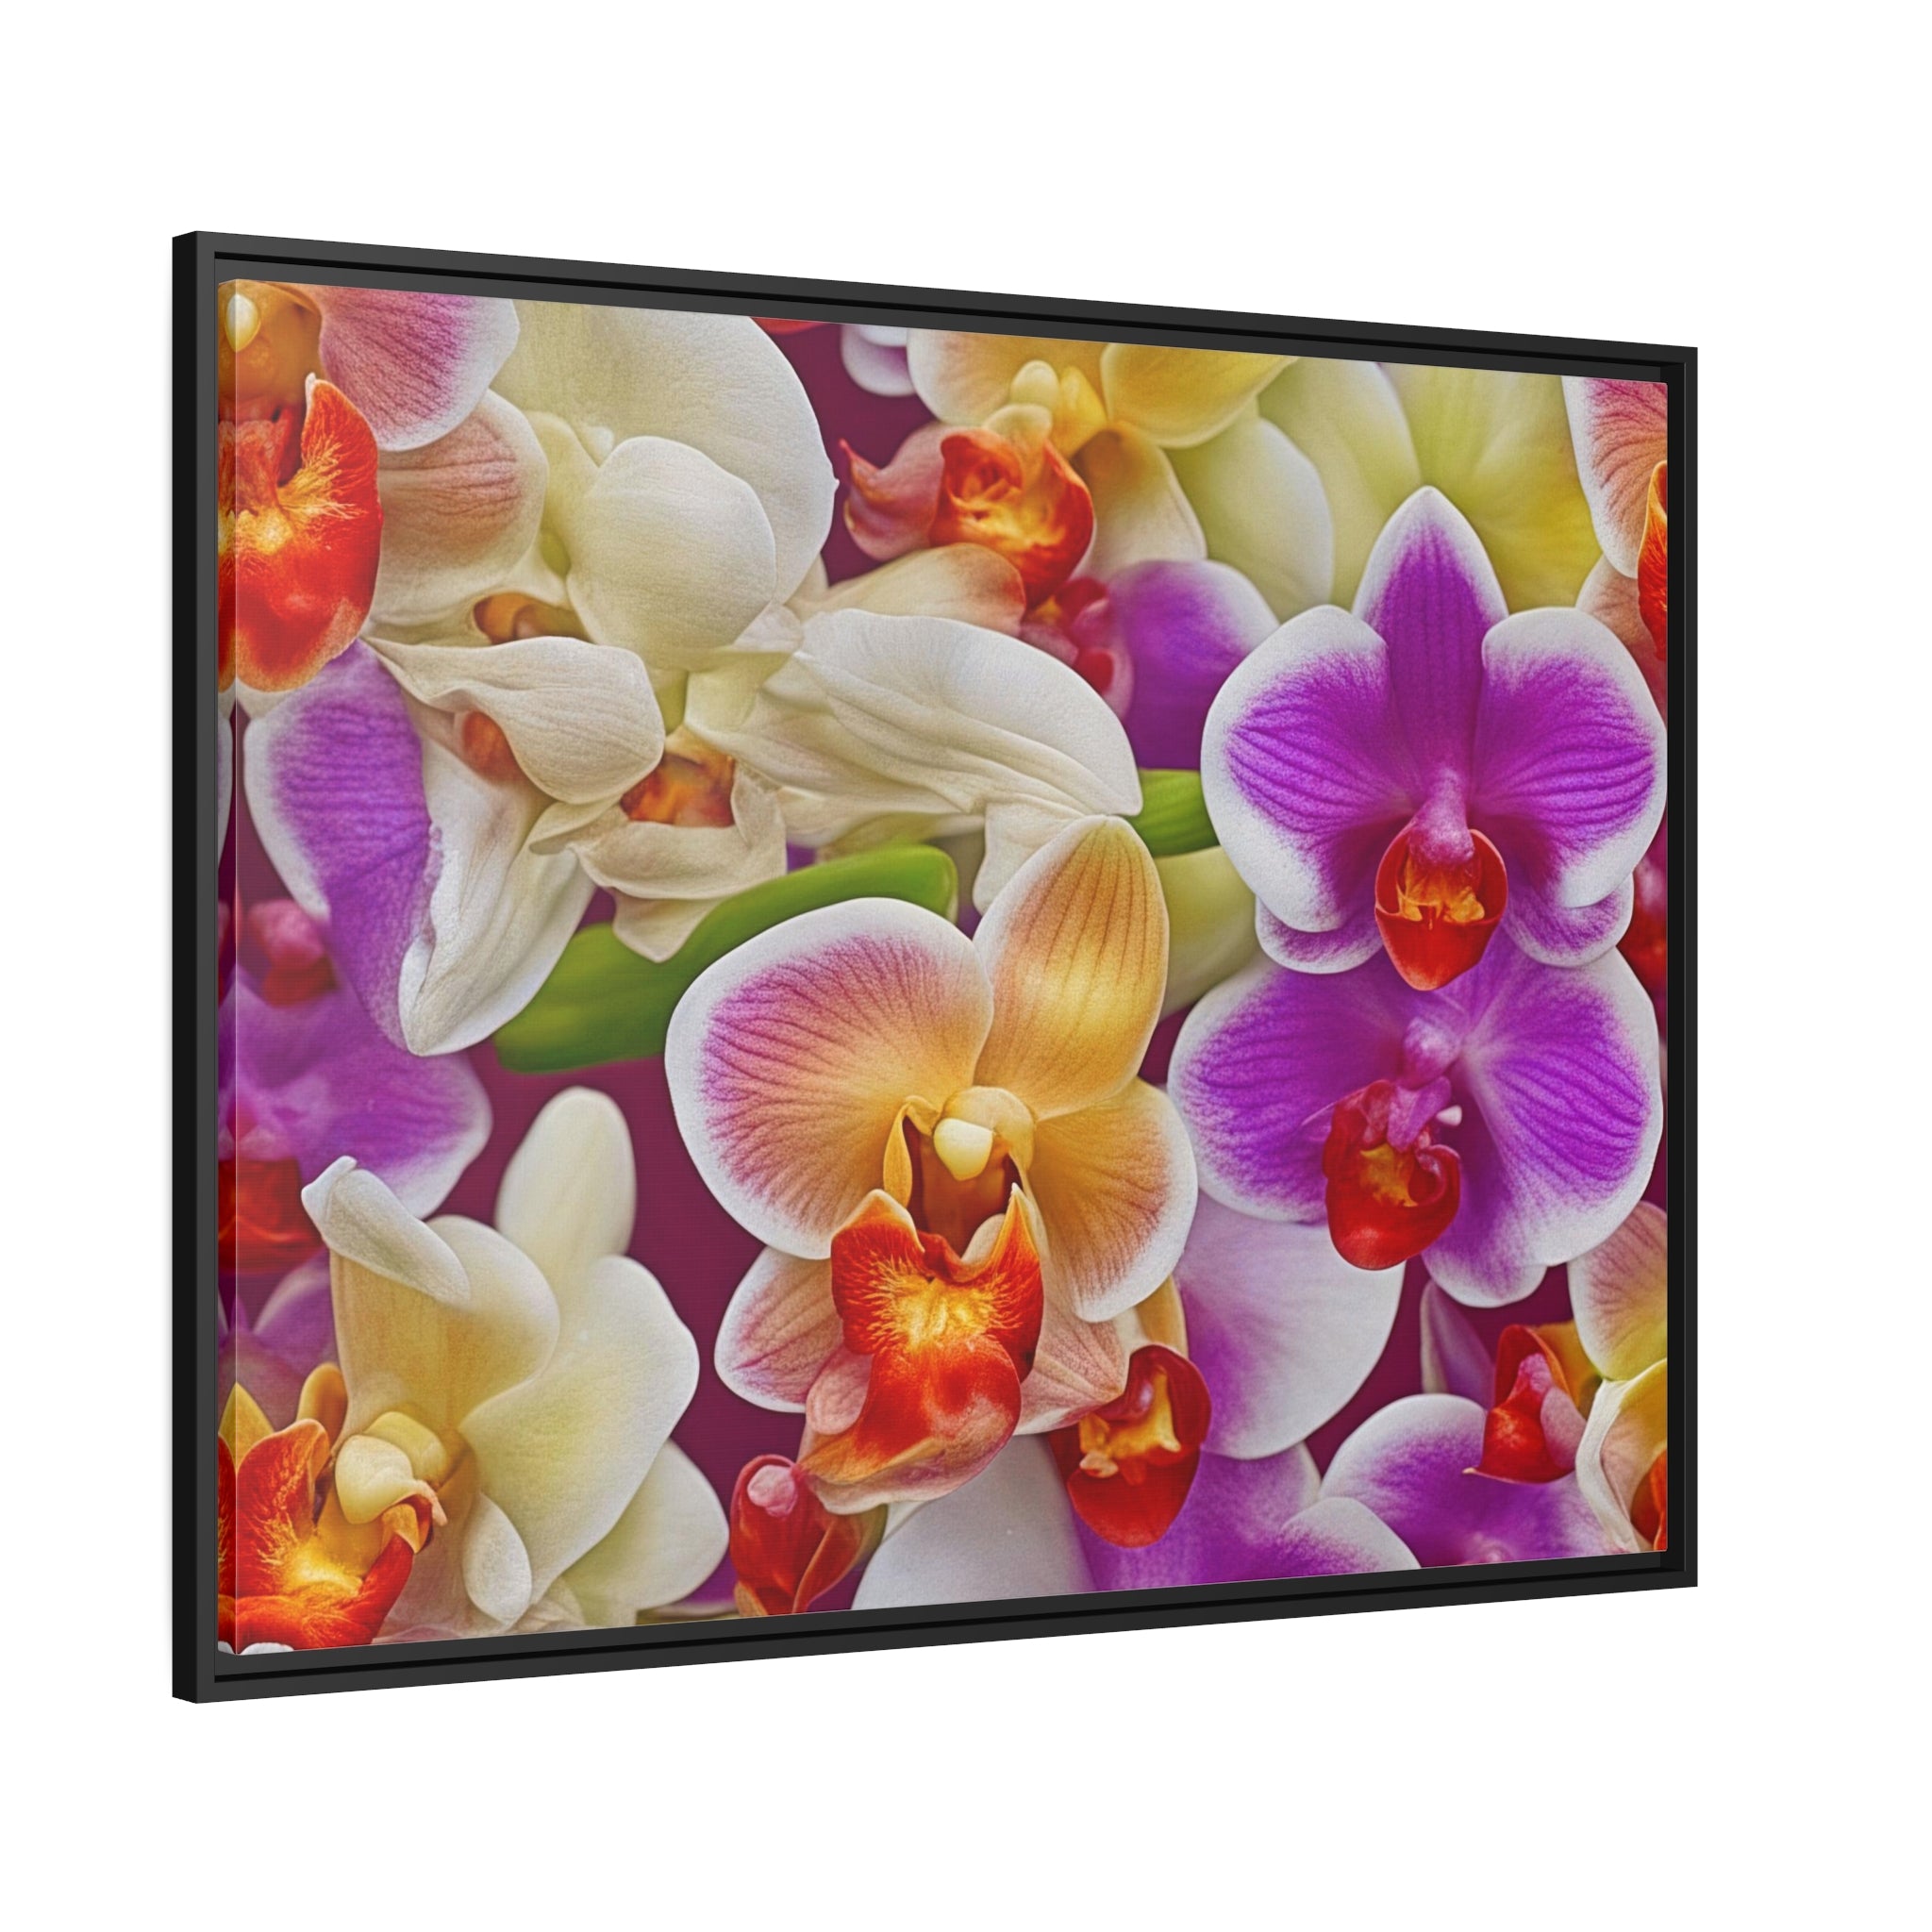 Wall Art ORCHIDS Canvas Print Art Deco Painting Original Giclee 40X30 + Frame Love Flower Minimalist Beauty Fun Design Fit House Office Gift Ready Hang